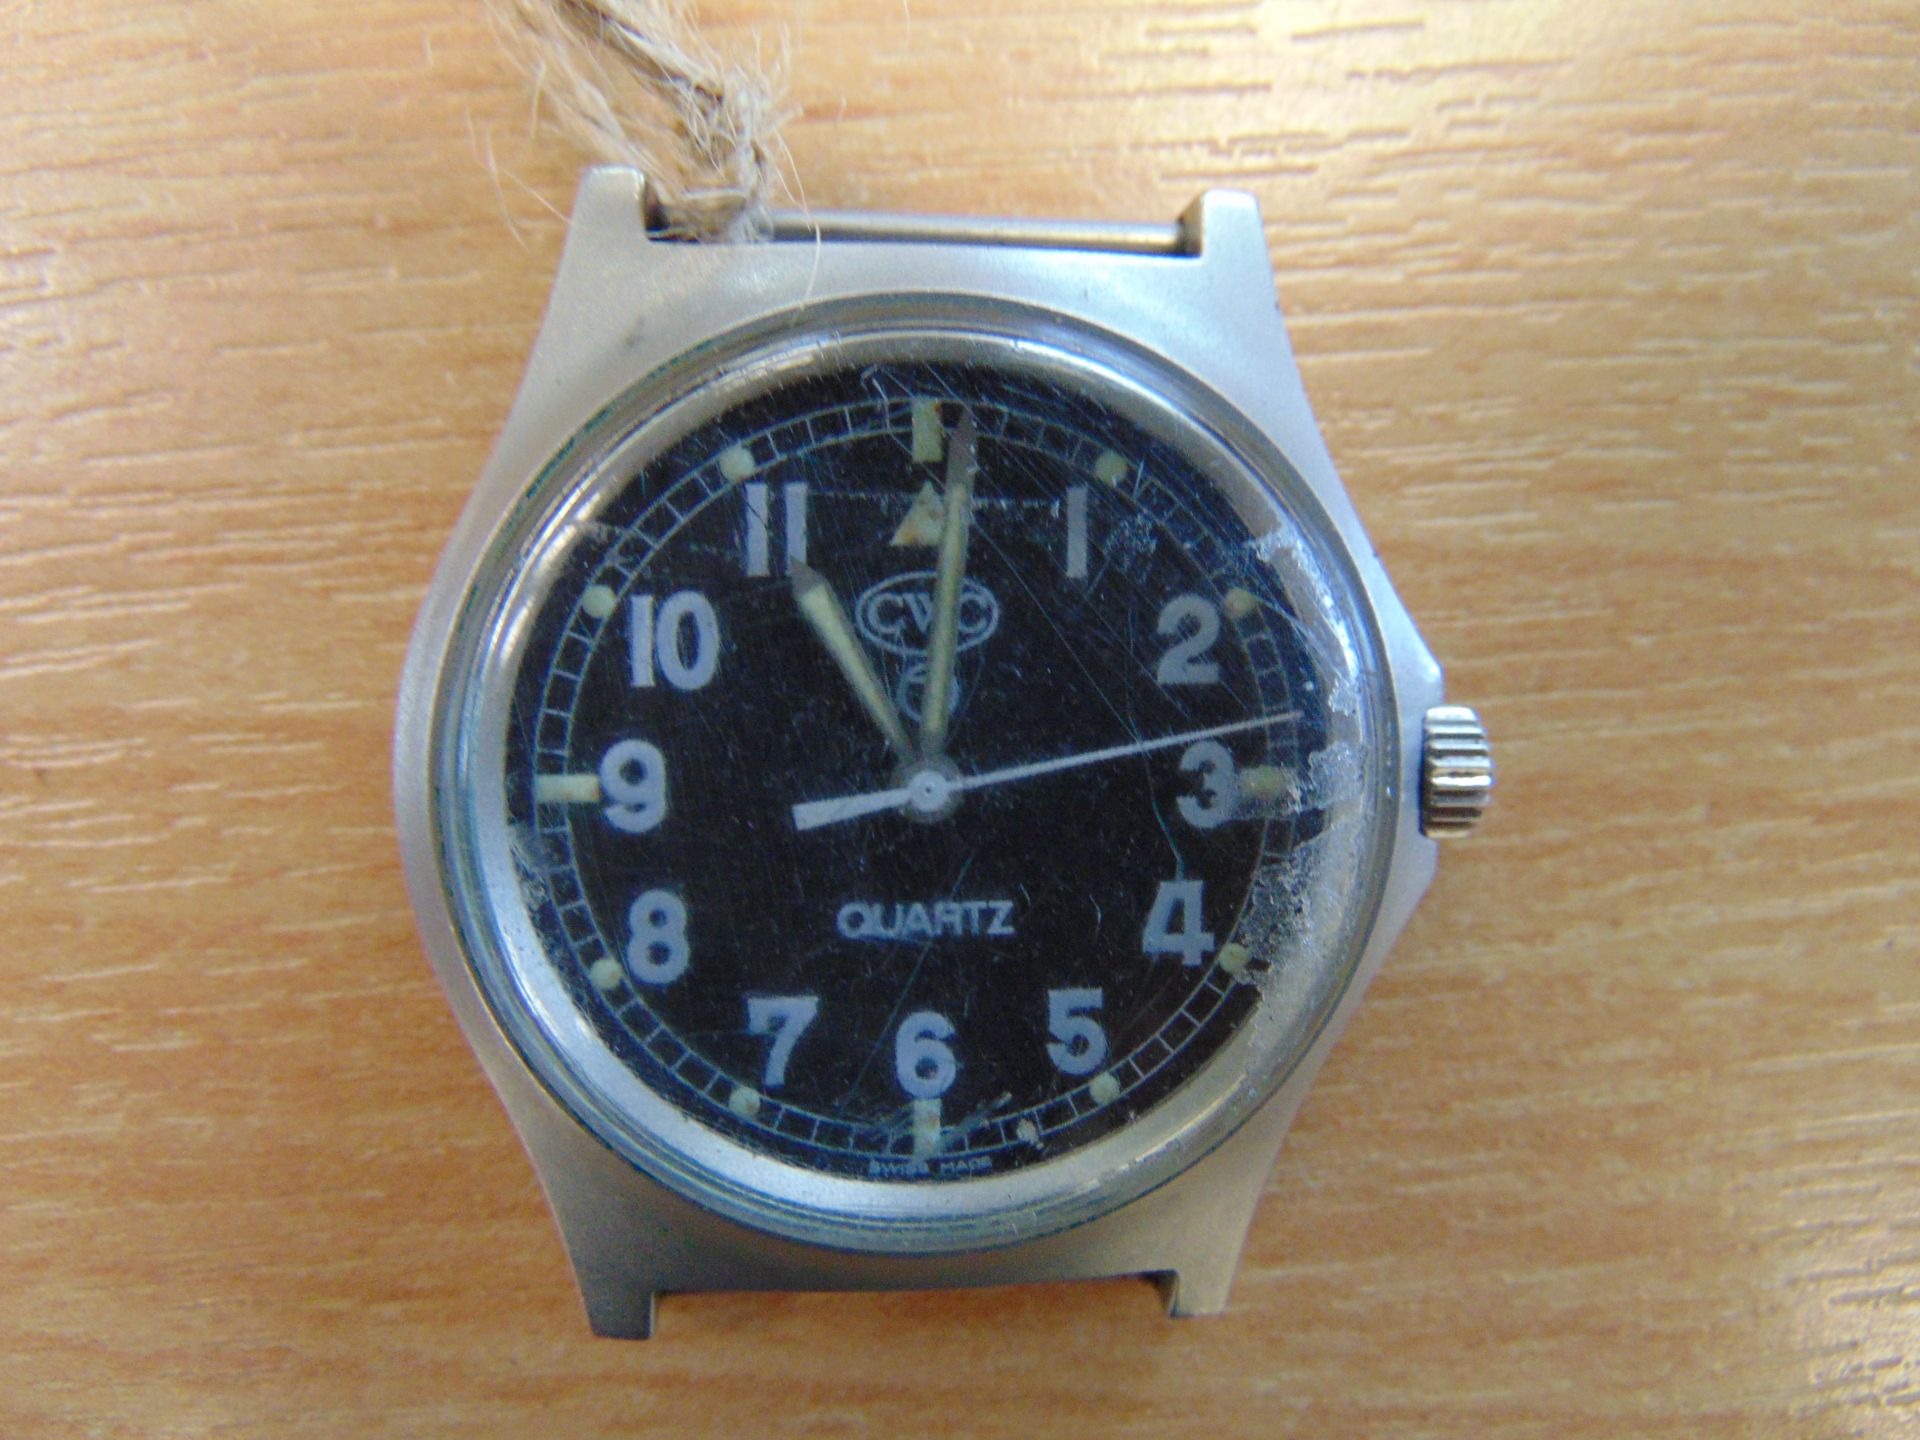 Rare CWC 0552 Royal Marines / Navy Issue Service Watch Nato Marks, Date 1990, * GULF WAR 1 * - Image 2 of 4